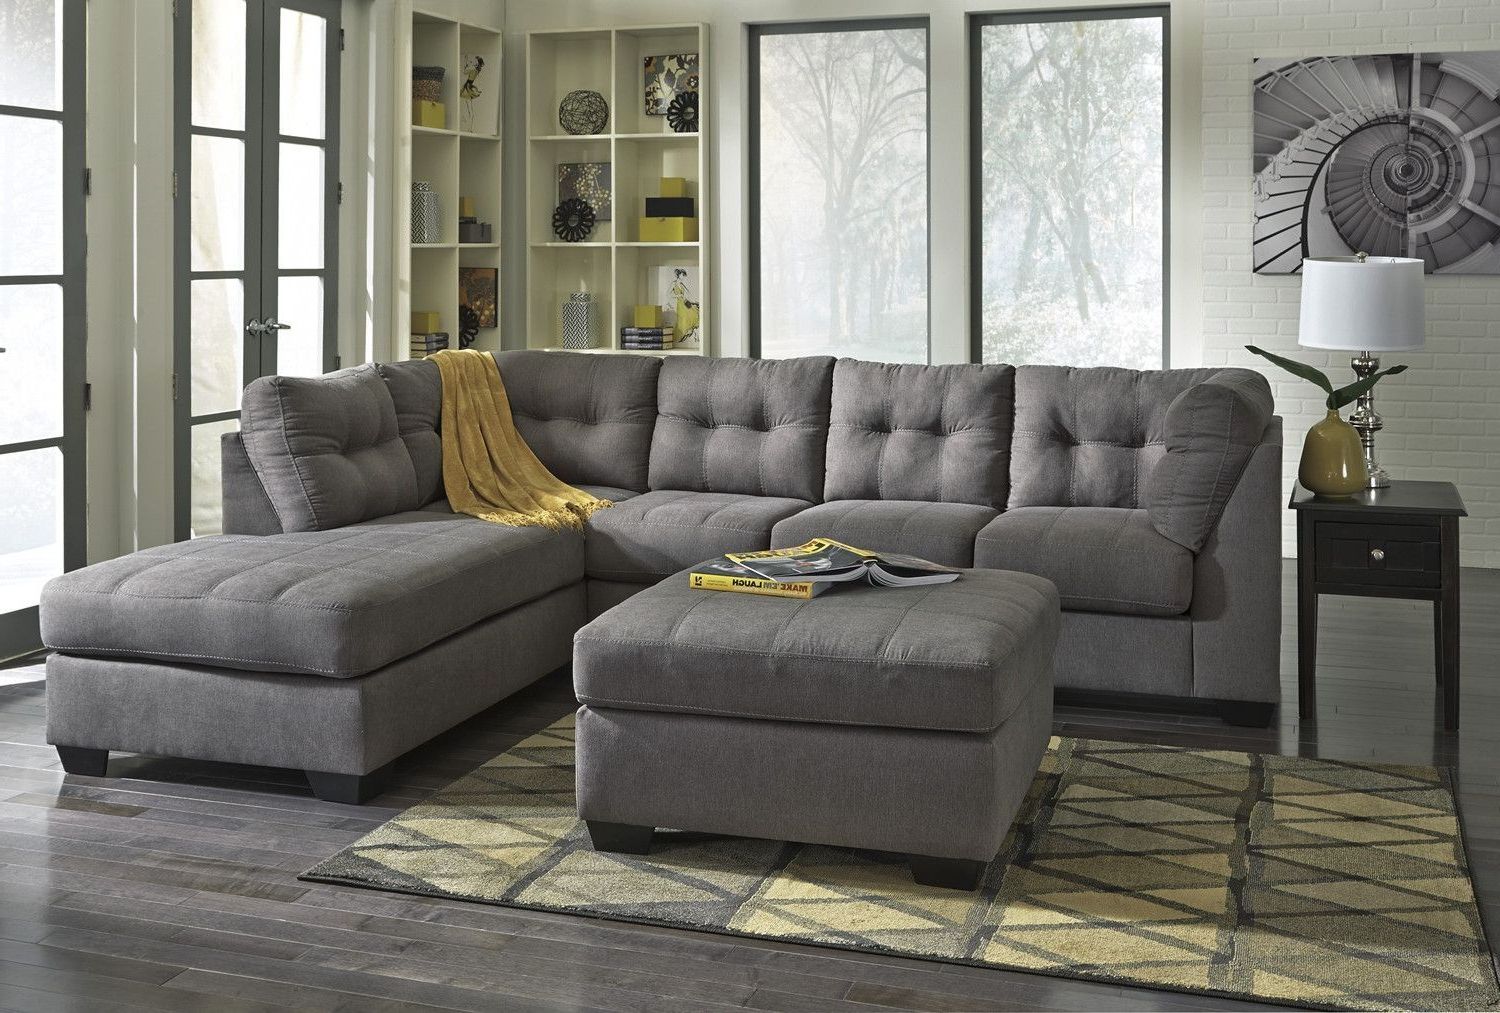 Ashley Furniture · Sectional Frame Constructions Have Been Rigorously With Current Left Or Right Facing Sleeper Sectionals (View 14 of 15)